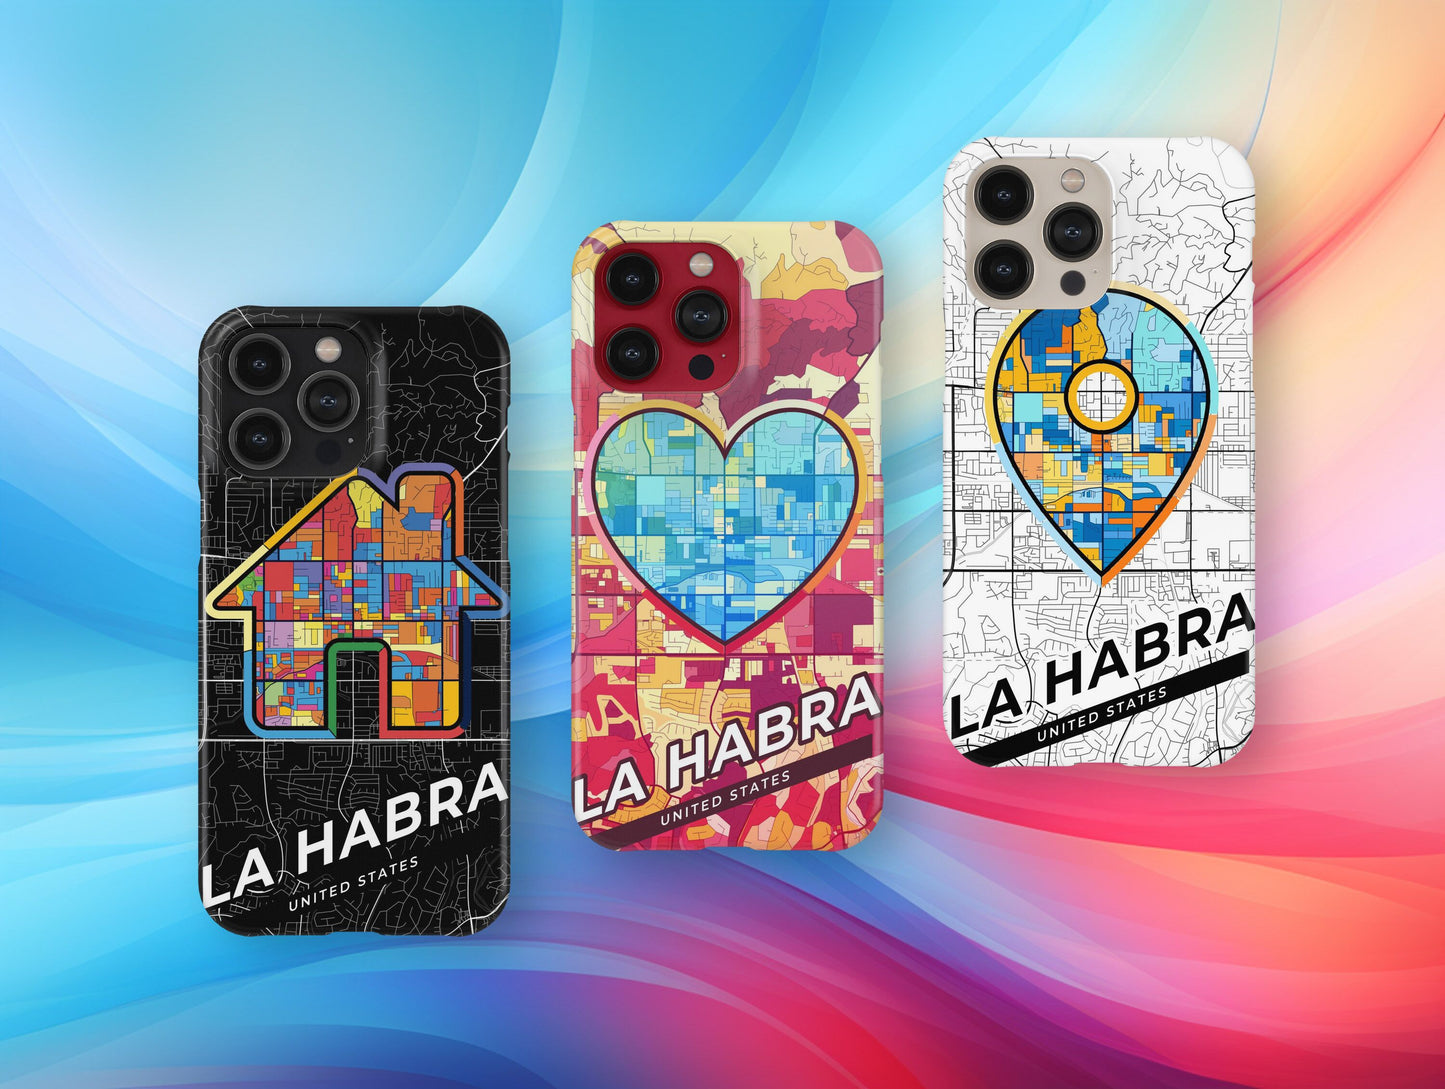 La Habra California slim phone case with colorful icon. Birthday, wedding or housewarming gift. Couple match cases.